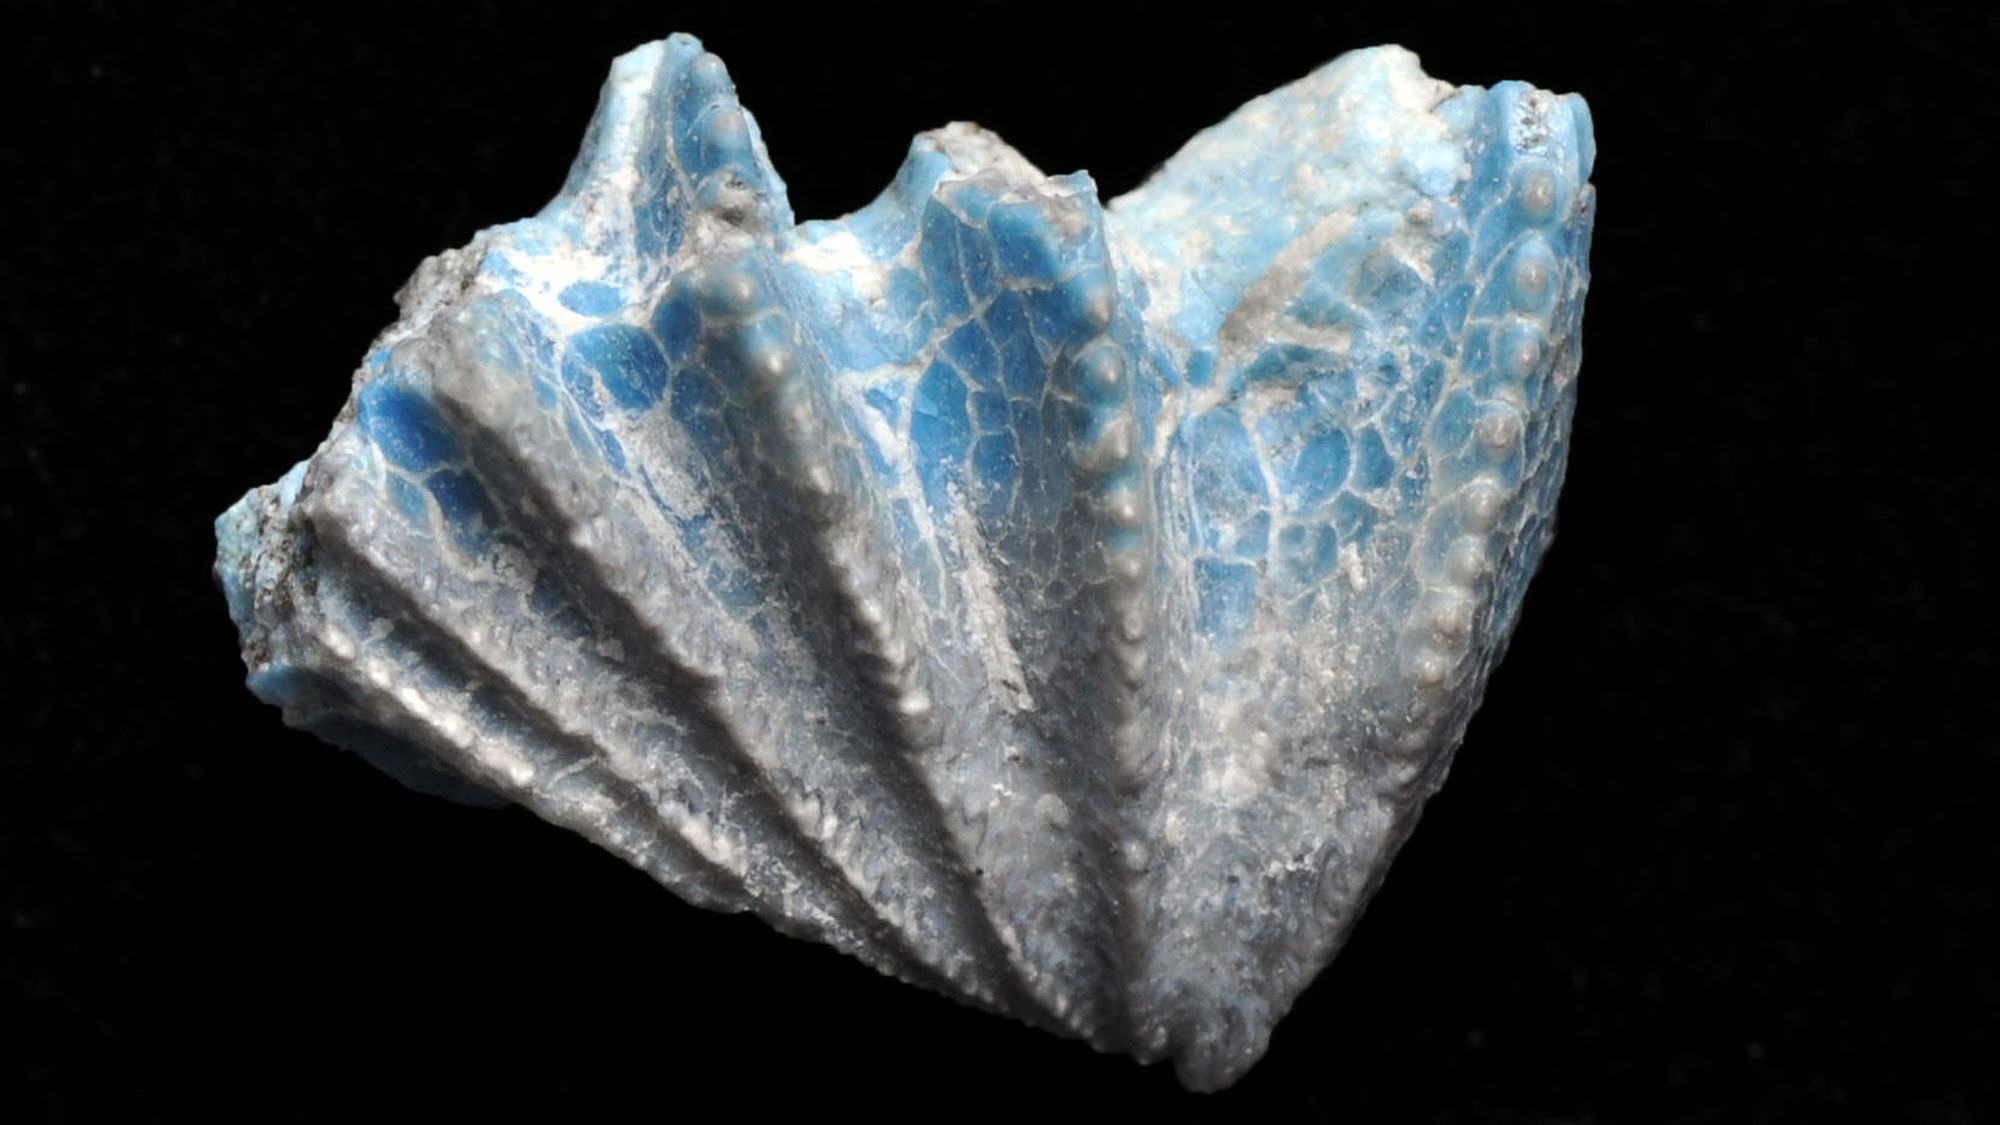 Photo of a lungfish toothplate from Petrified Forest National Park. The fossil is blue, gray, and white. The shape is triangular, and the surface appears folded or ribs, with teeth on the highest part of each fold or rib.